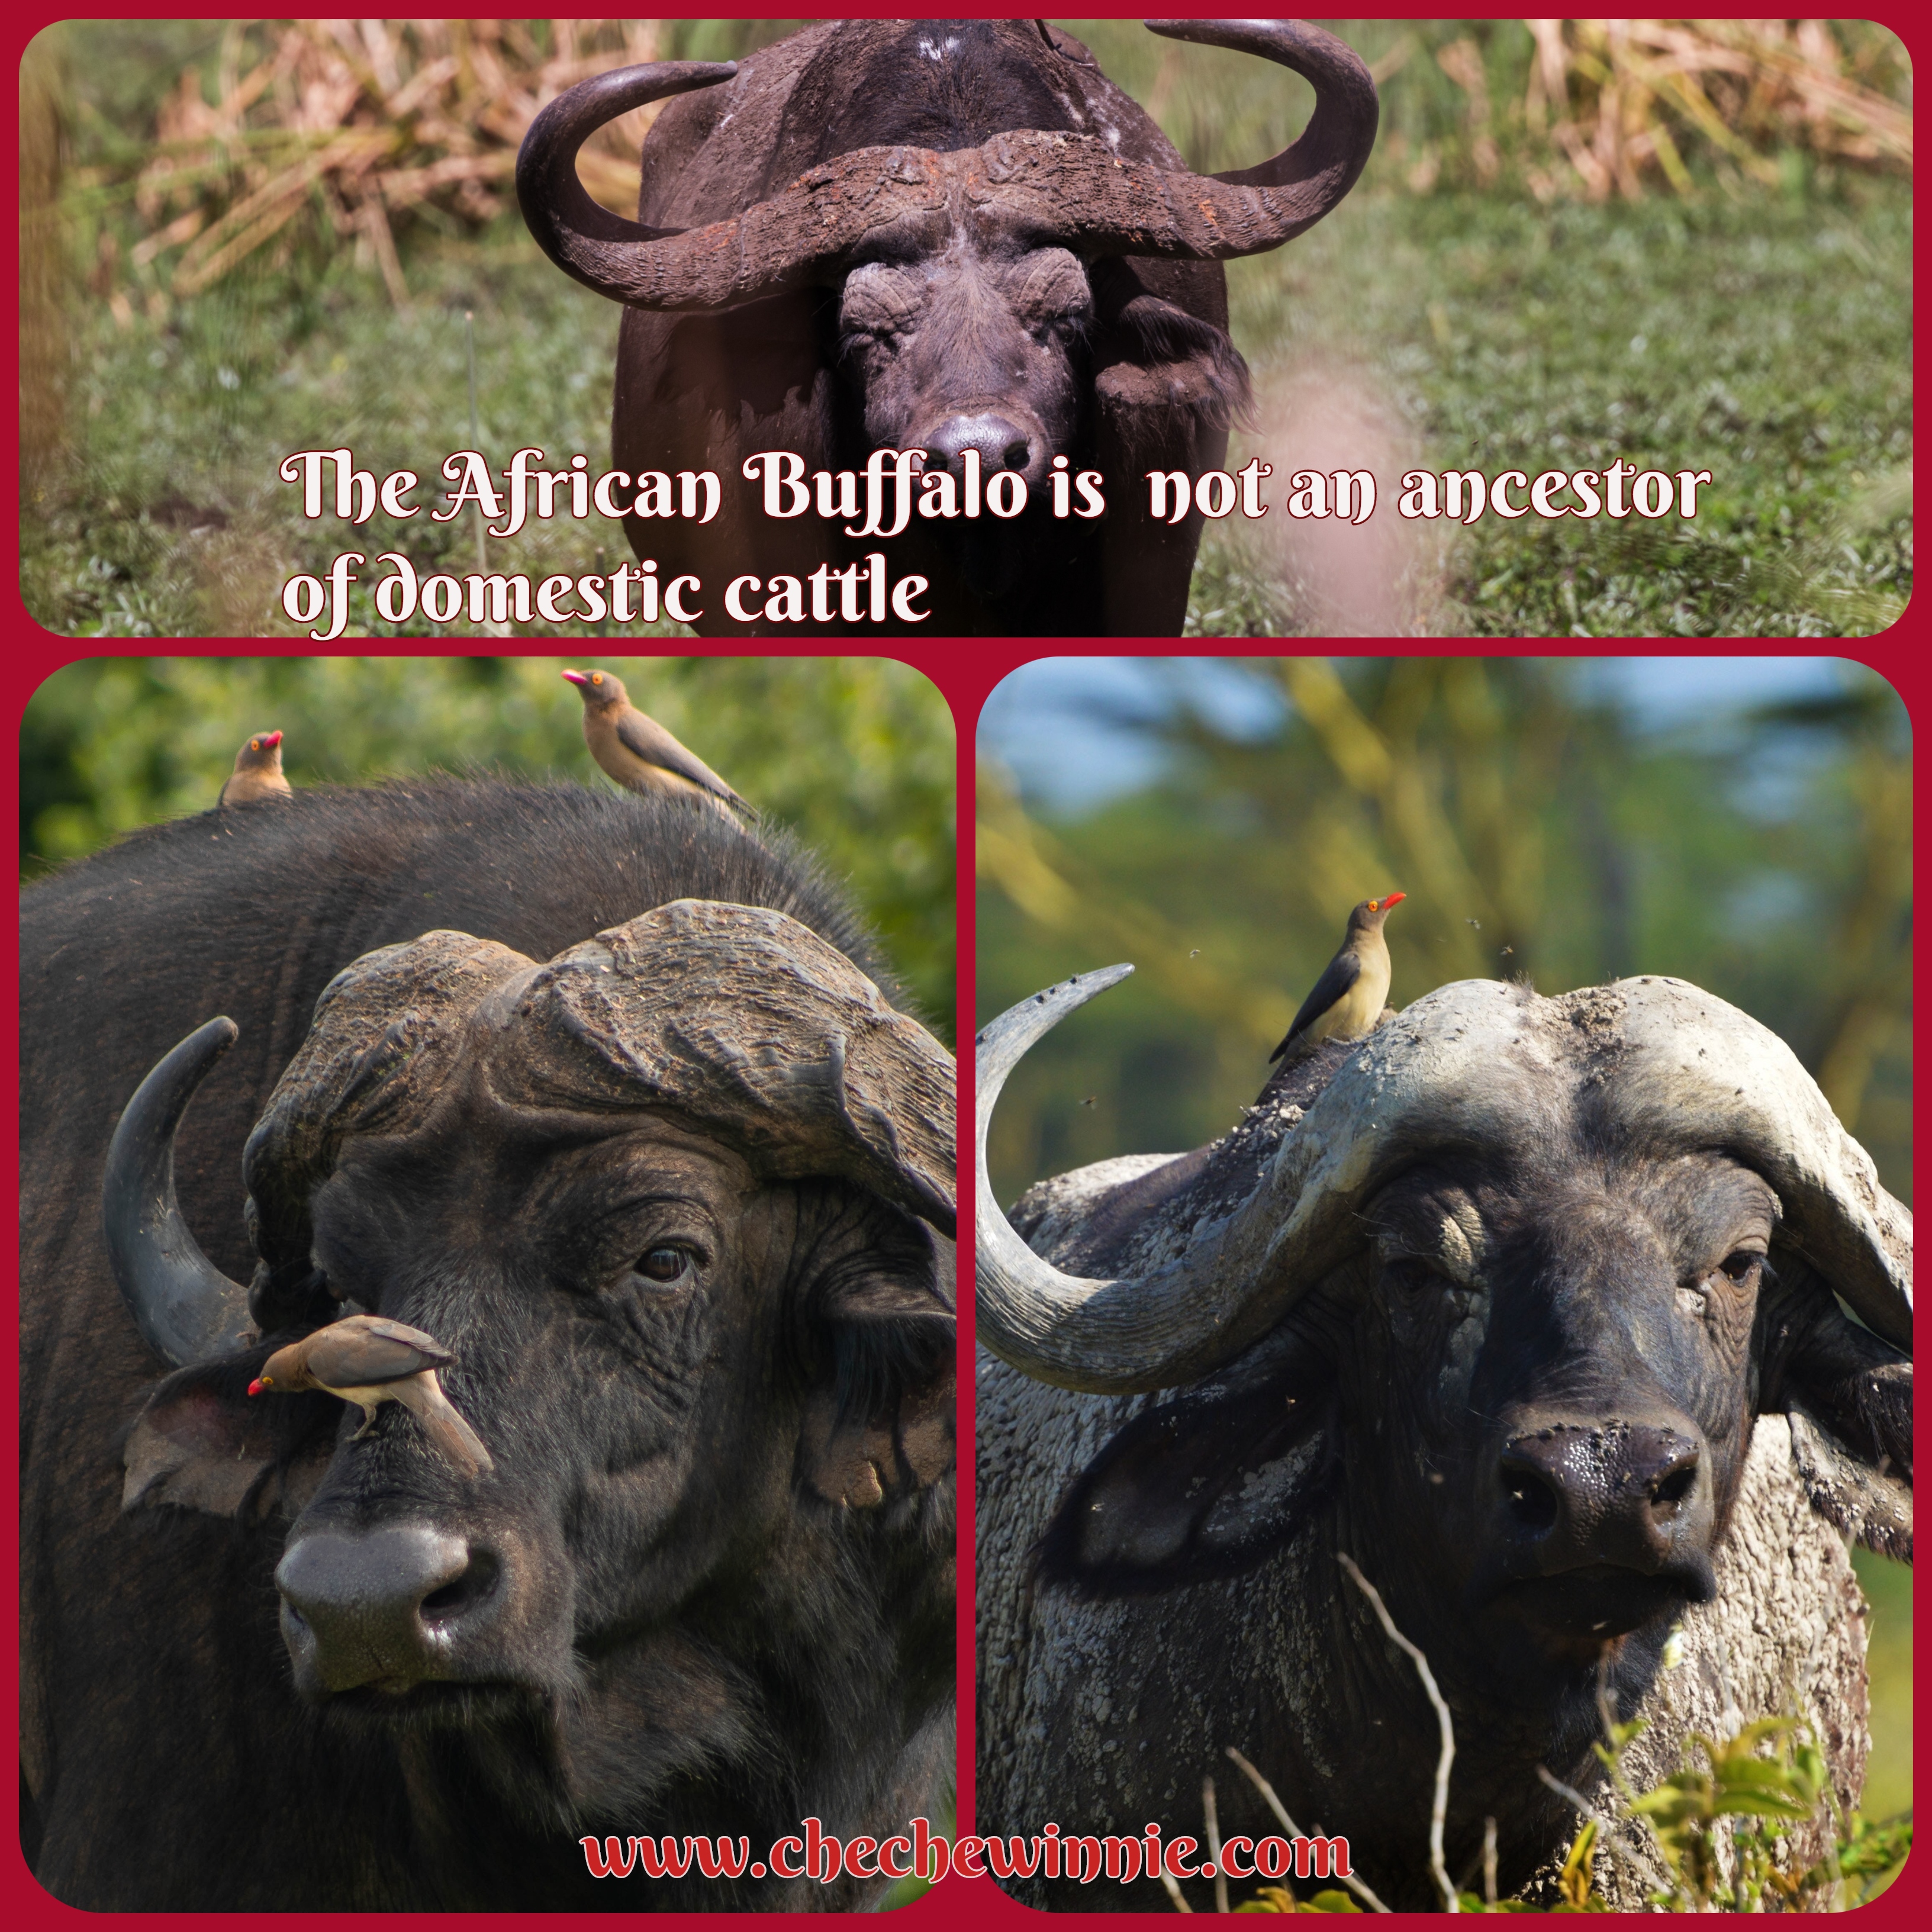 The African Buffalo is not an ancestor of domestic cattle